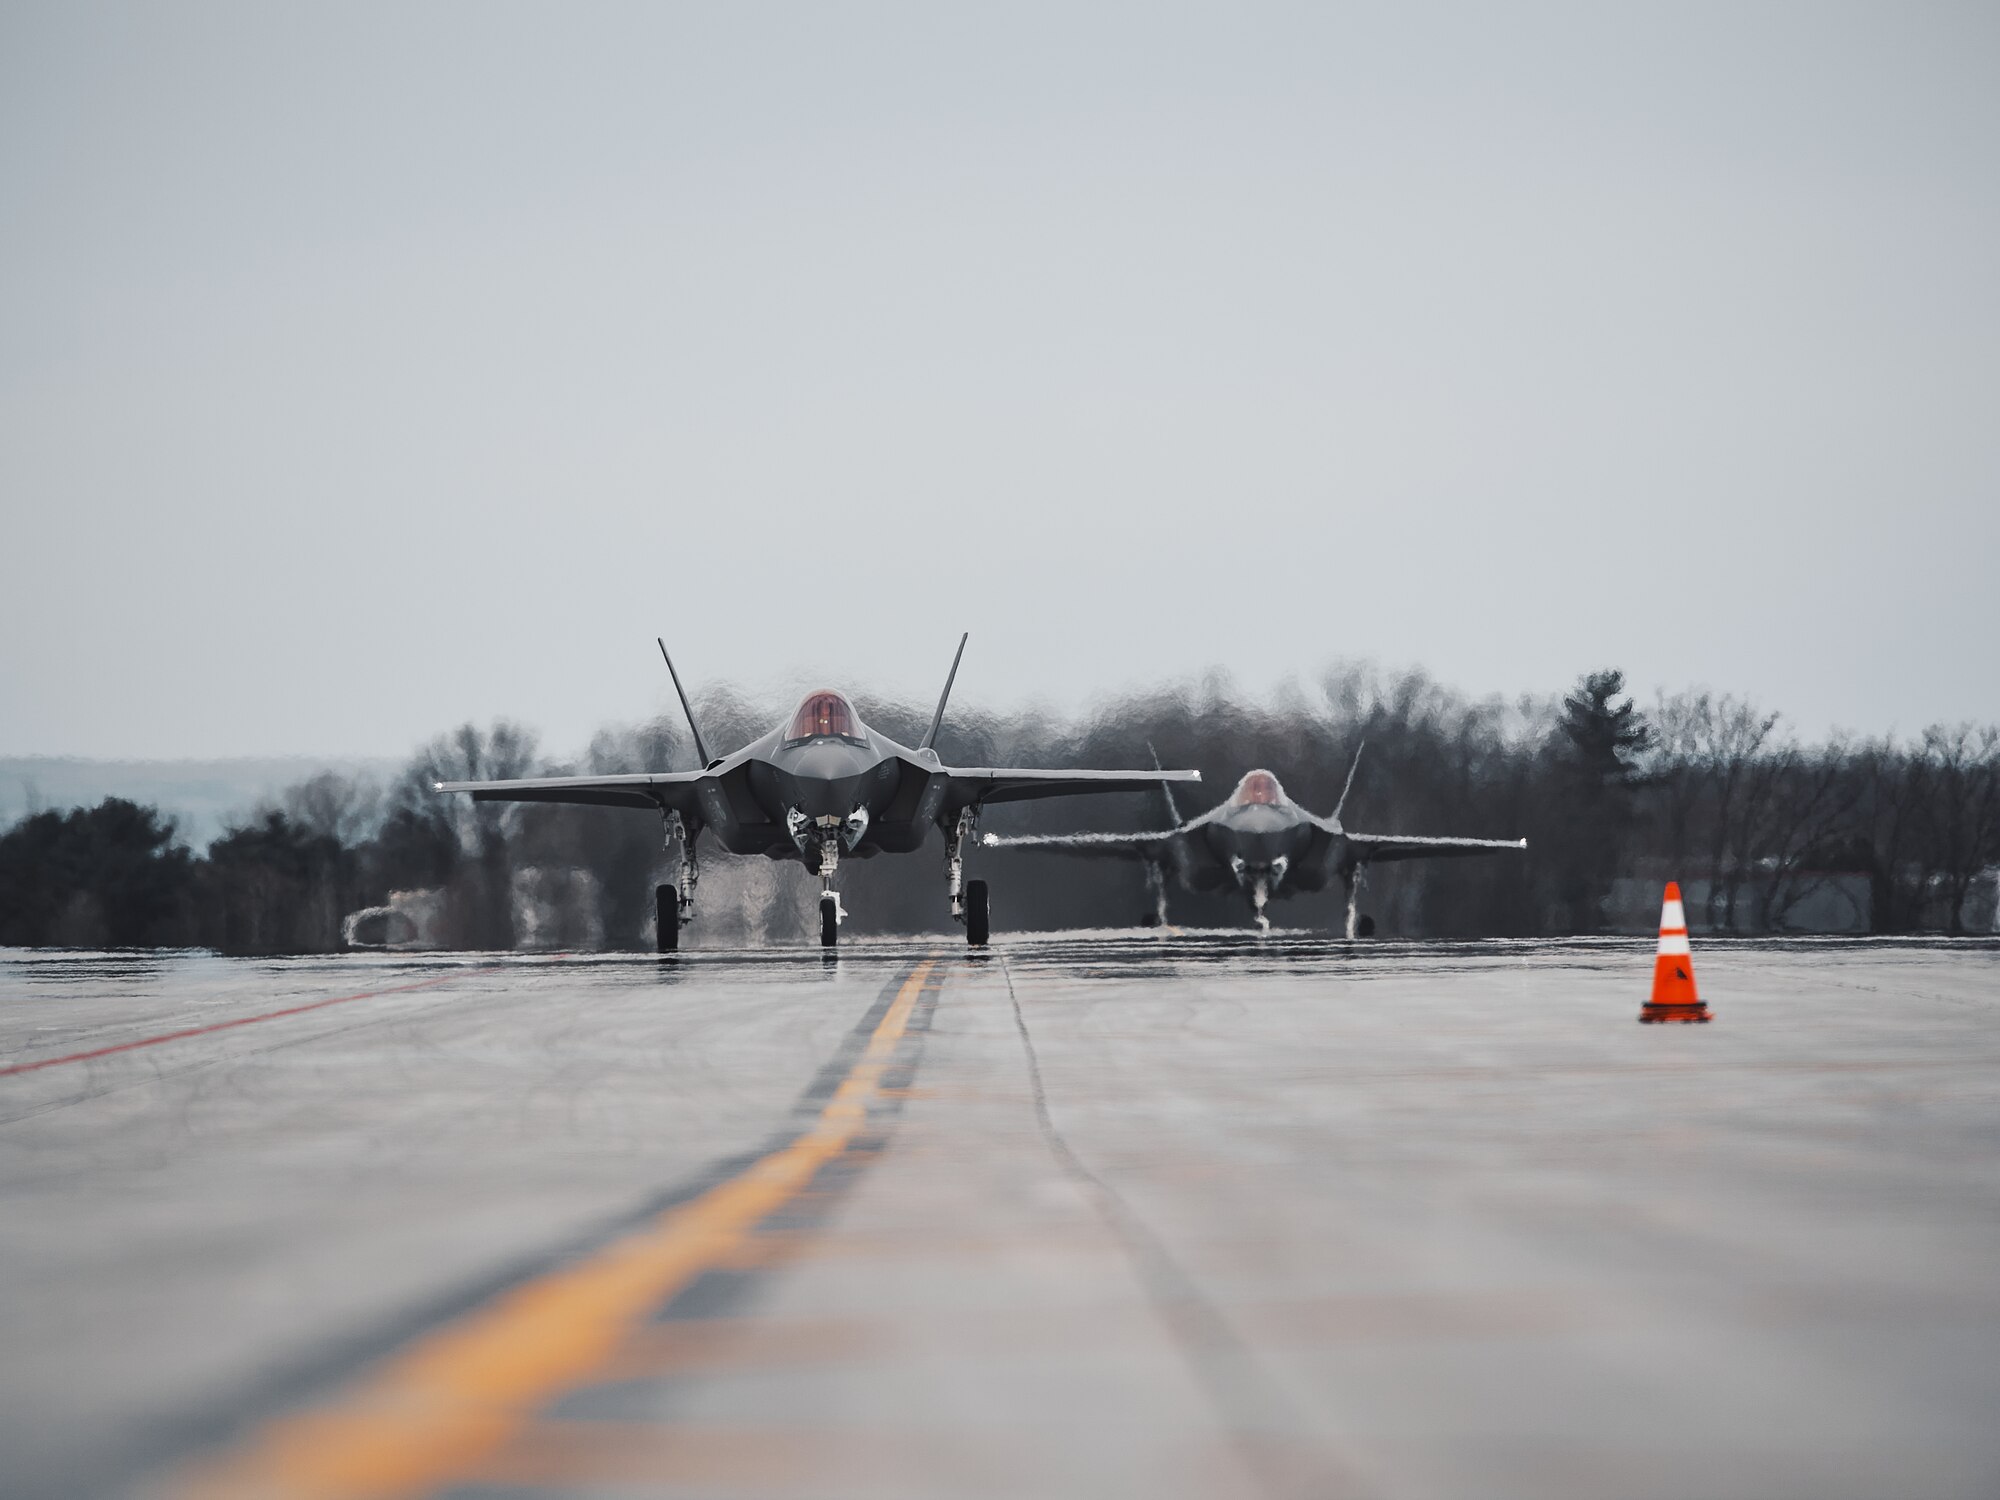 Pilots assigned to the 158th Fighter Wing, Vermont Air National Guard, land after flying a routine training mission, Vermont Air National Guard Base.